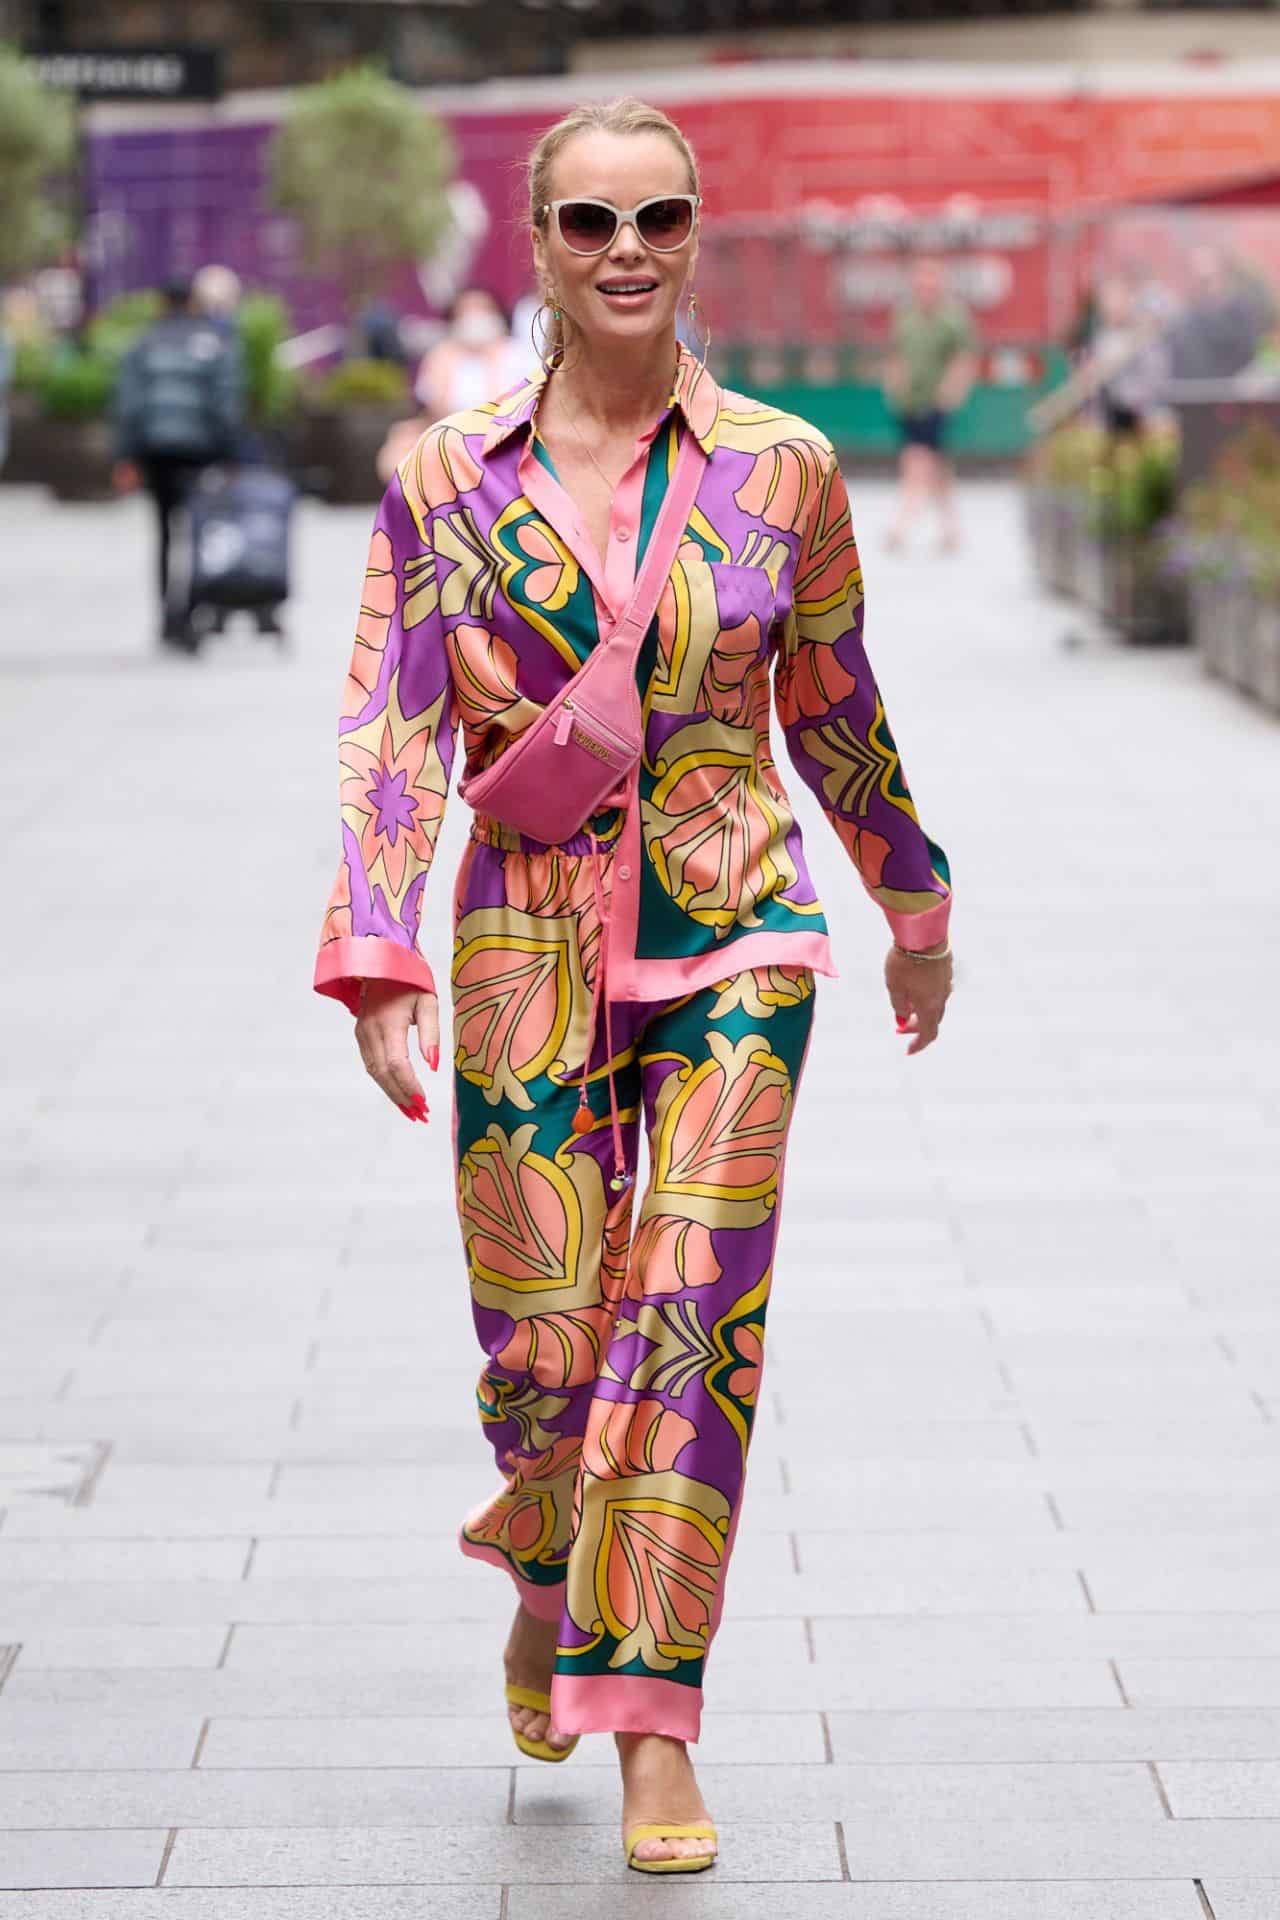 Amanda Holden Leaves Global Radio in London in Colorful Outfit